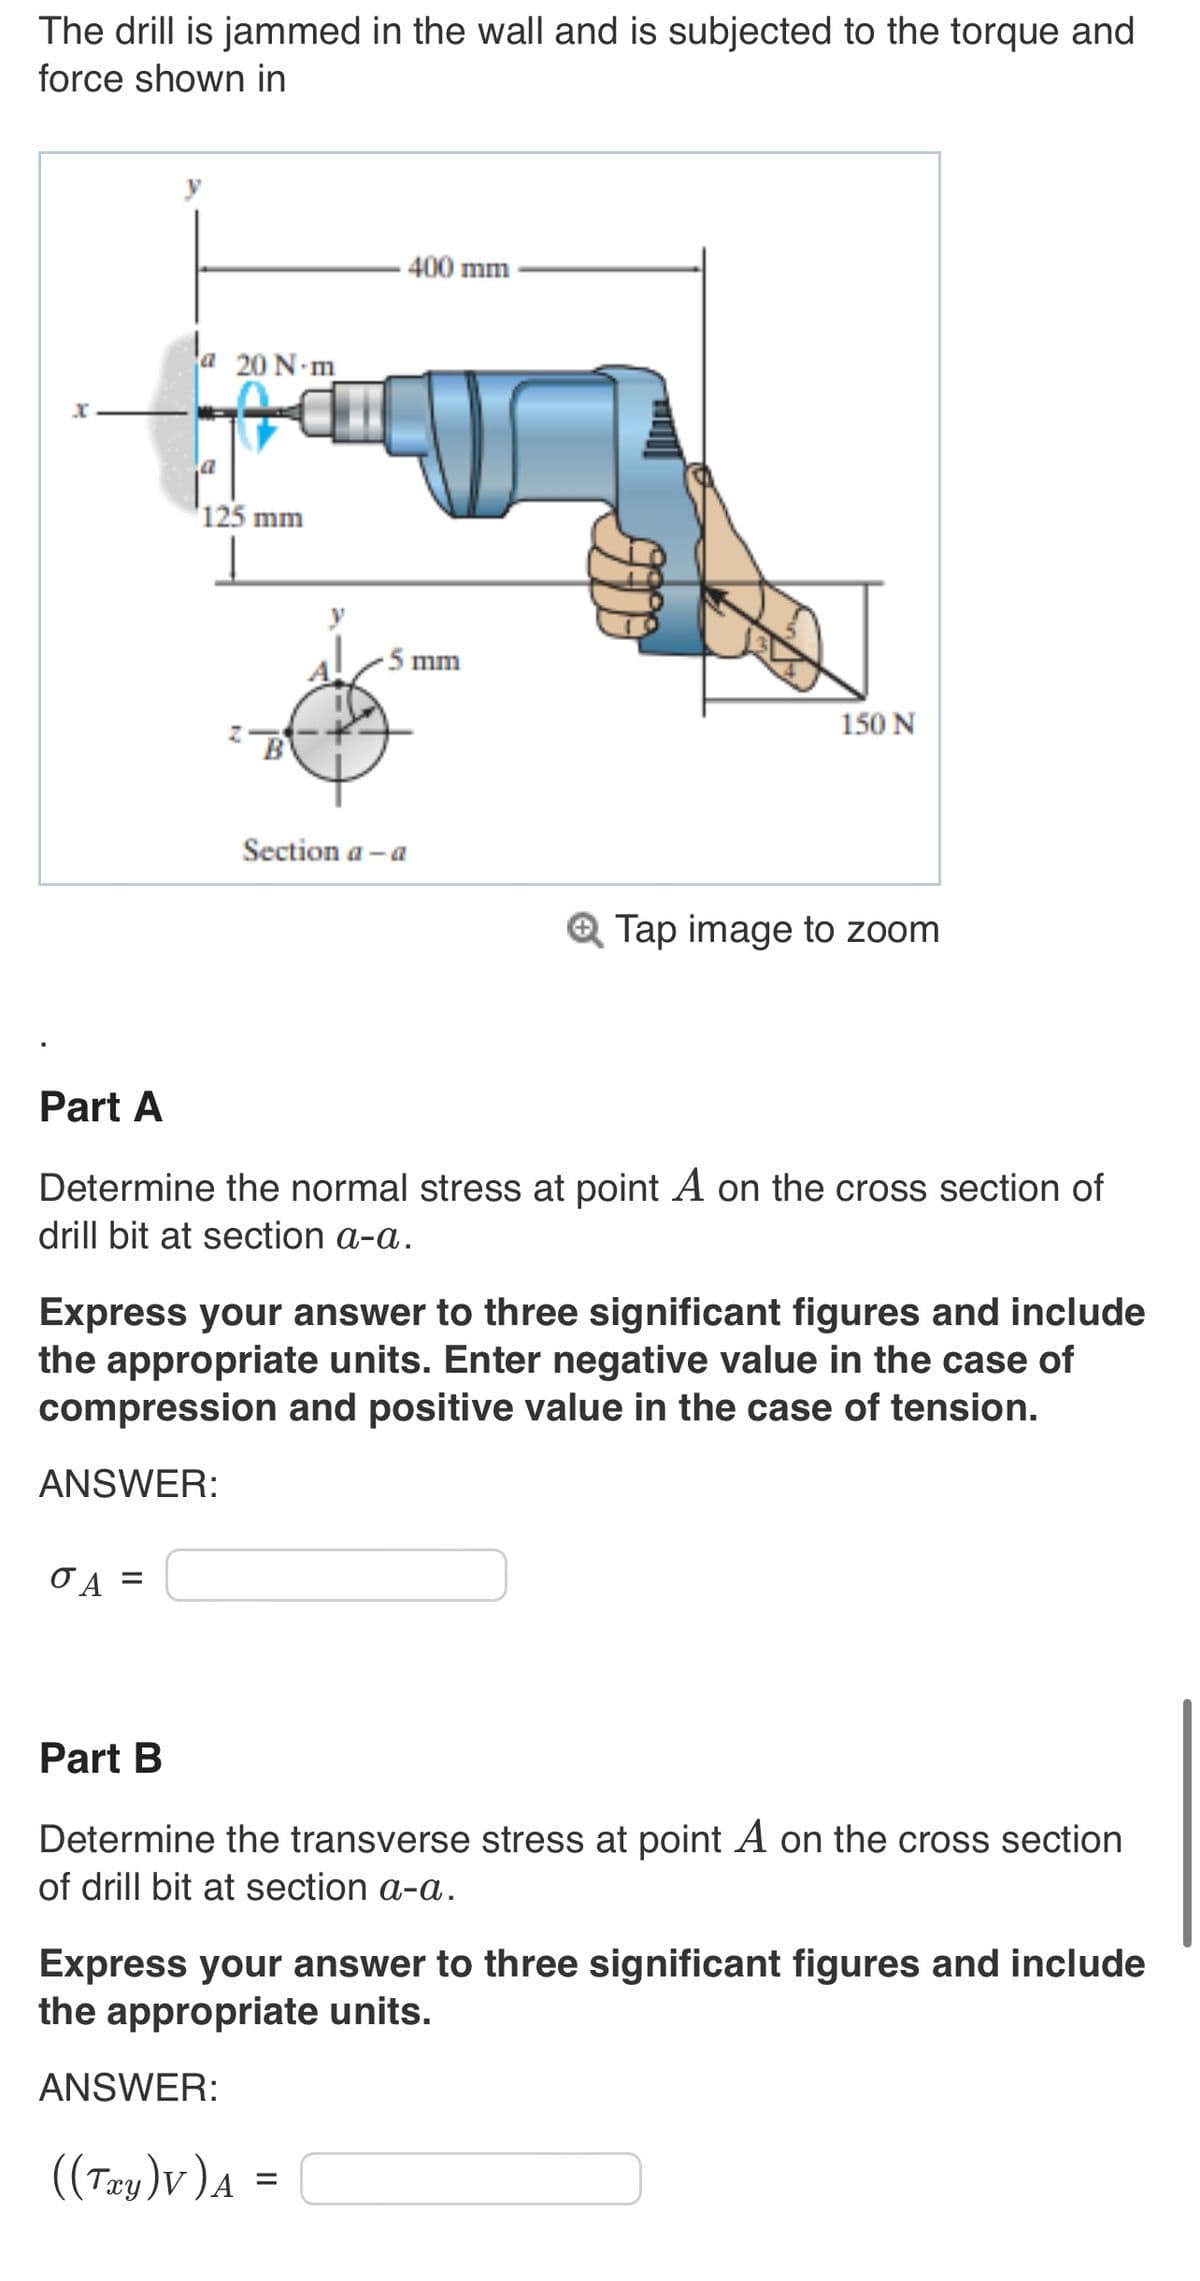 The drill is jammed in the wall and is subjected to the torque and
force shown in
a 20 N-m
O A
125 mm
=
B
400 mm
-5 mm
Section a-a
Part A
Determine the normal stress at point A on the cross section of
drill bit at section a-a.
150 N
Express your answer to three significant figures and include
the appropriate units. Enter negative value in the case of
compression and positive value in the case of tension.
ANSWER:
Tap image to zoom
ANSWER:
((Txy)V) A =
Part B
Determine the transverse stress at point A on the cross section
of drill bit at section a-a.
Express your answer to three significant figures and include
the appropriate units.